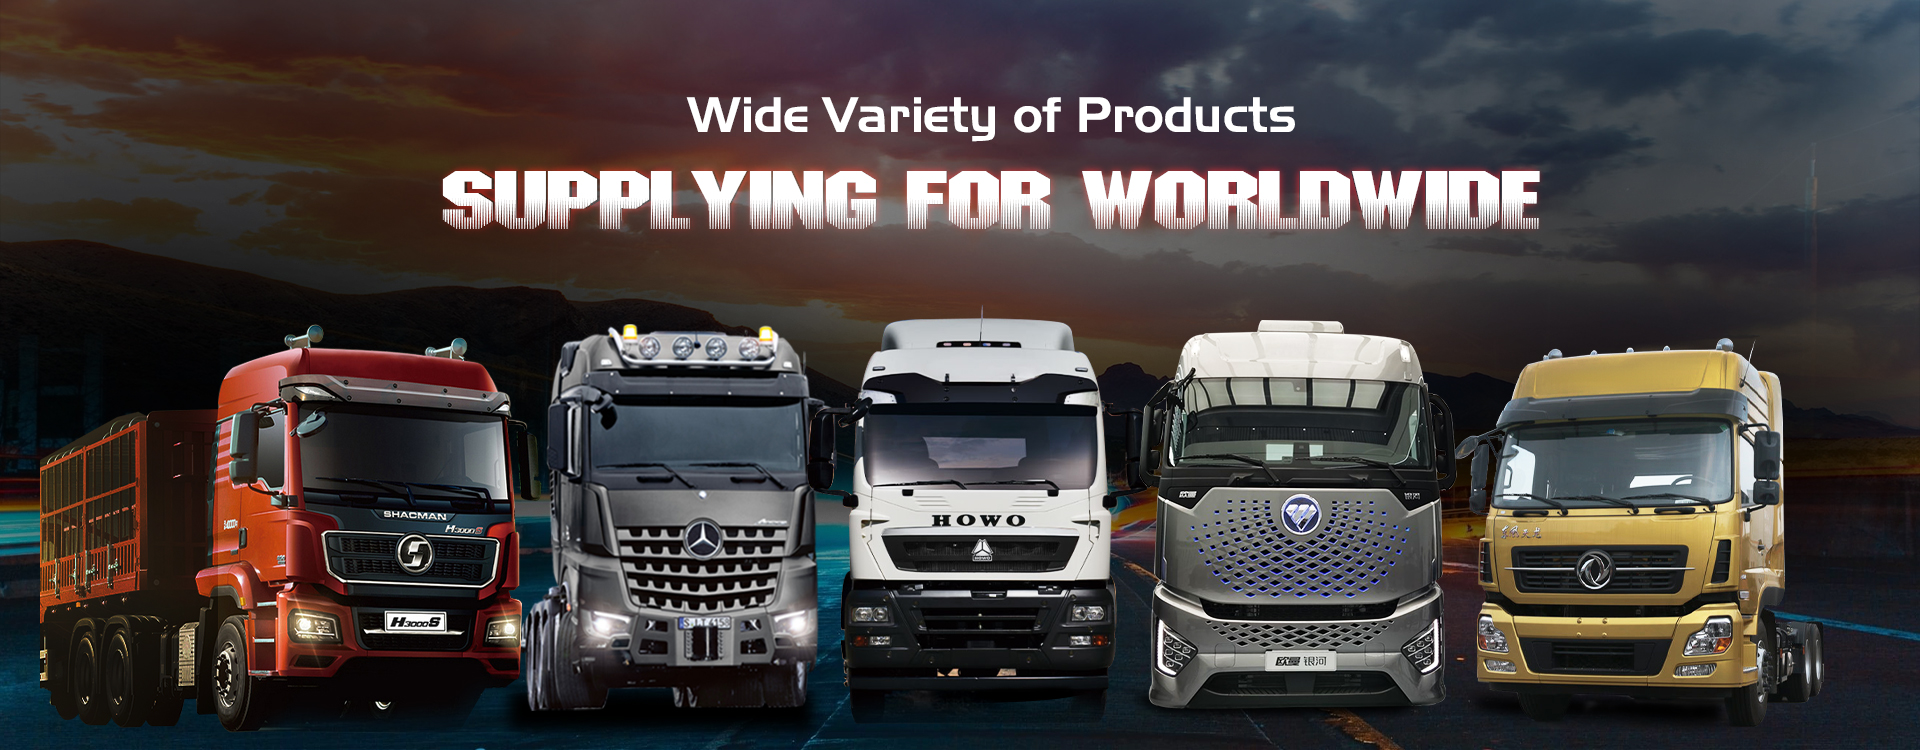 CLW Group Chengli Special Automobile Co., Ltd